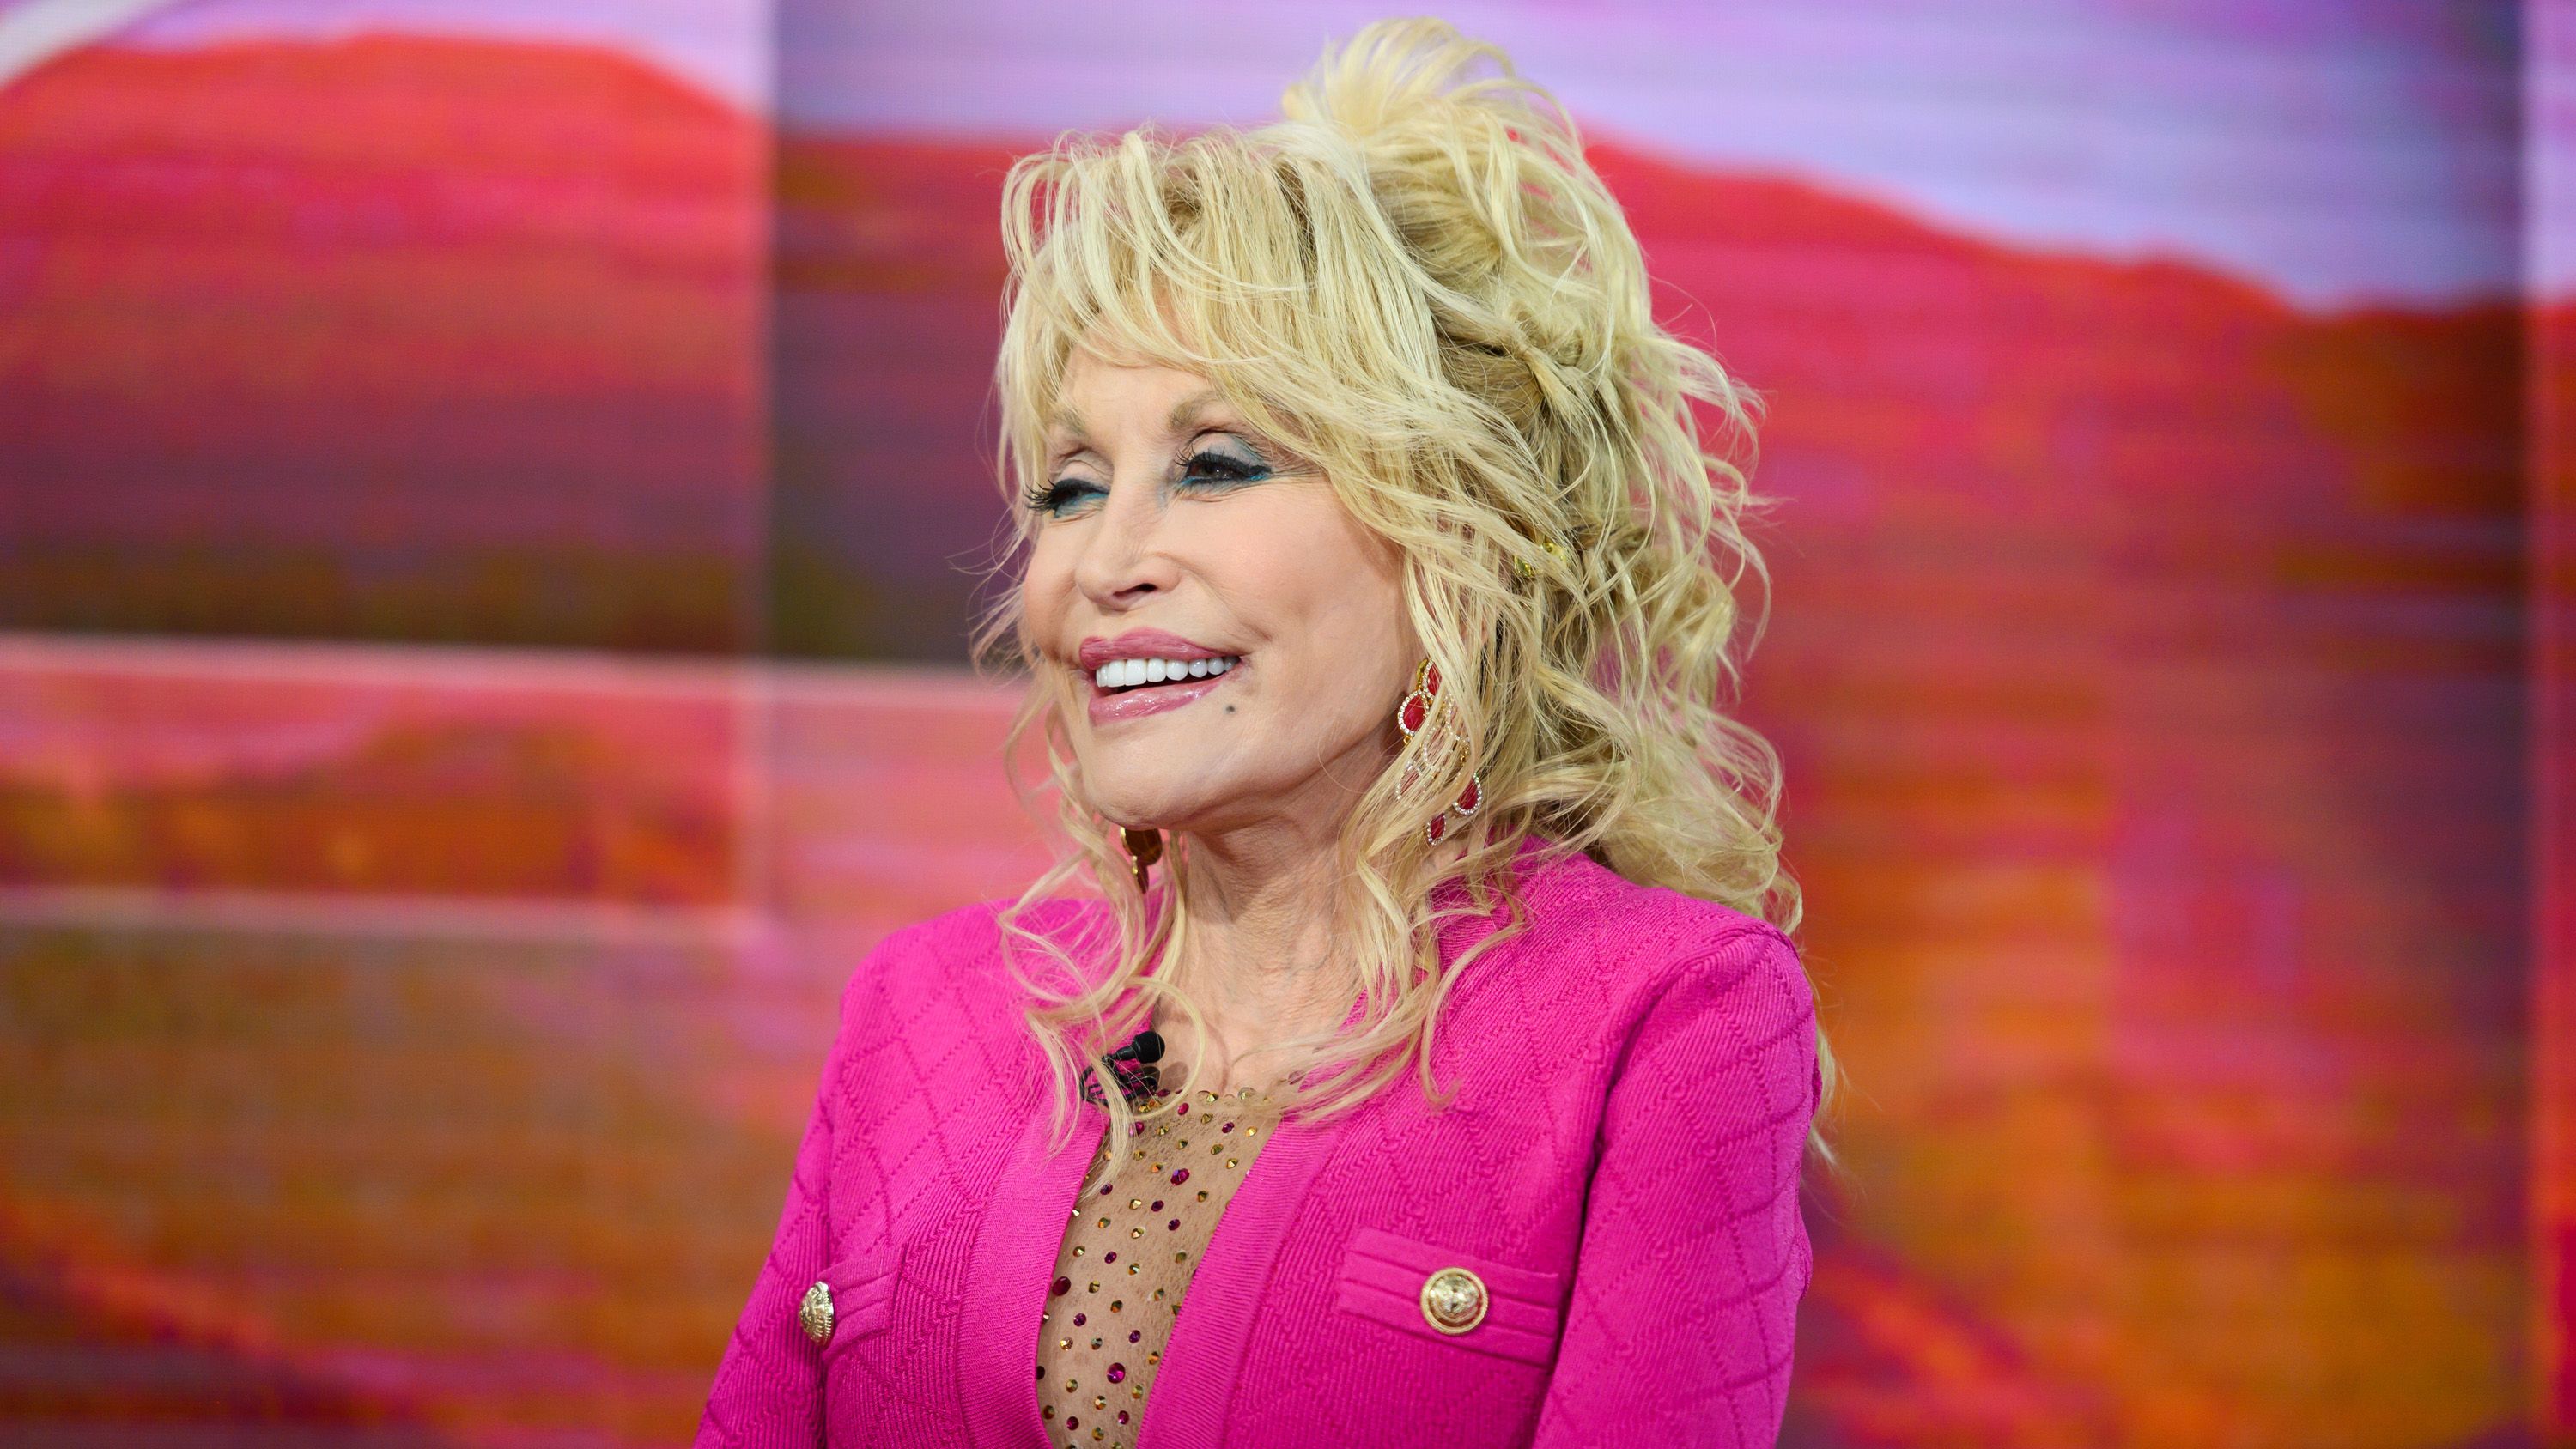 Dolly Parton wearing a pink coat